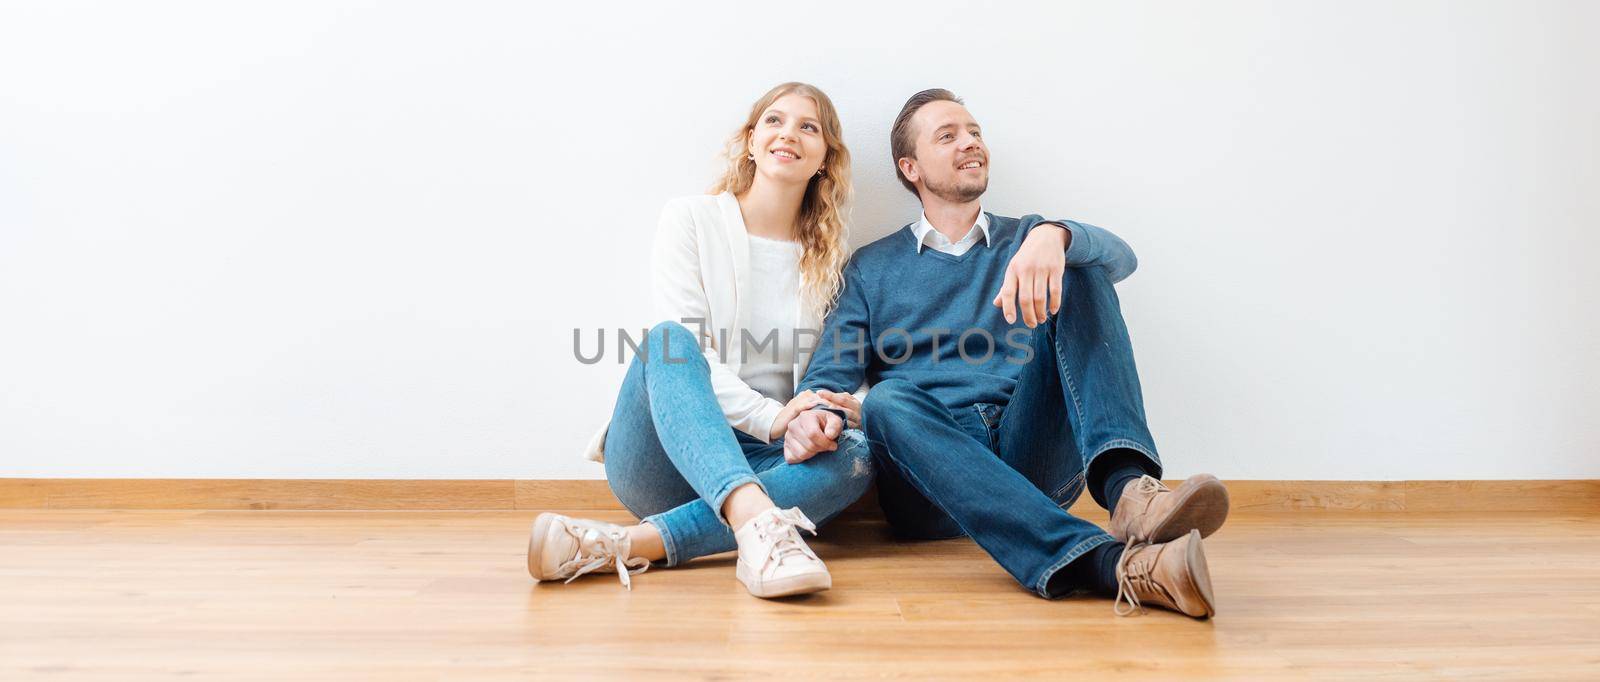 Couple dreaming about their future in the new apartment by Kzenon